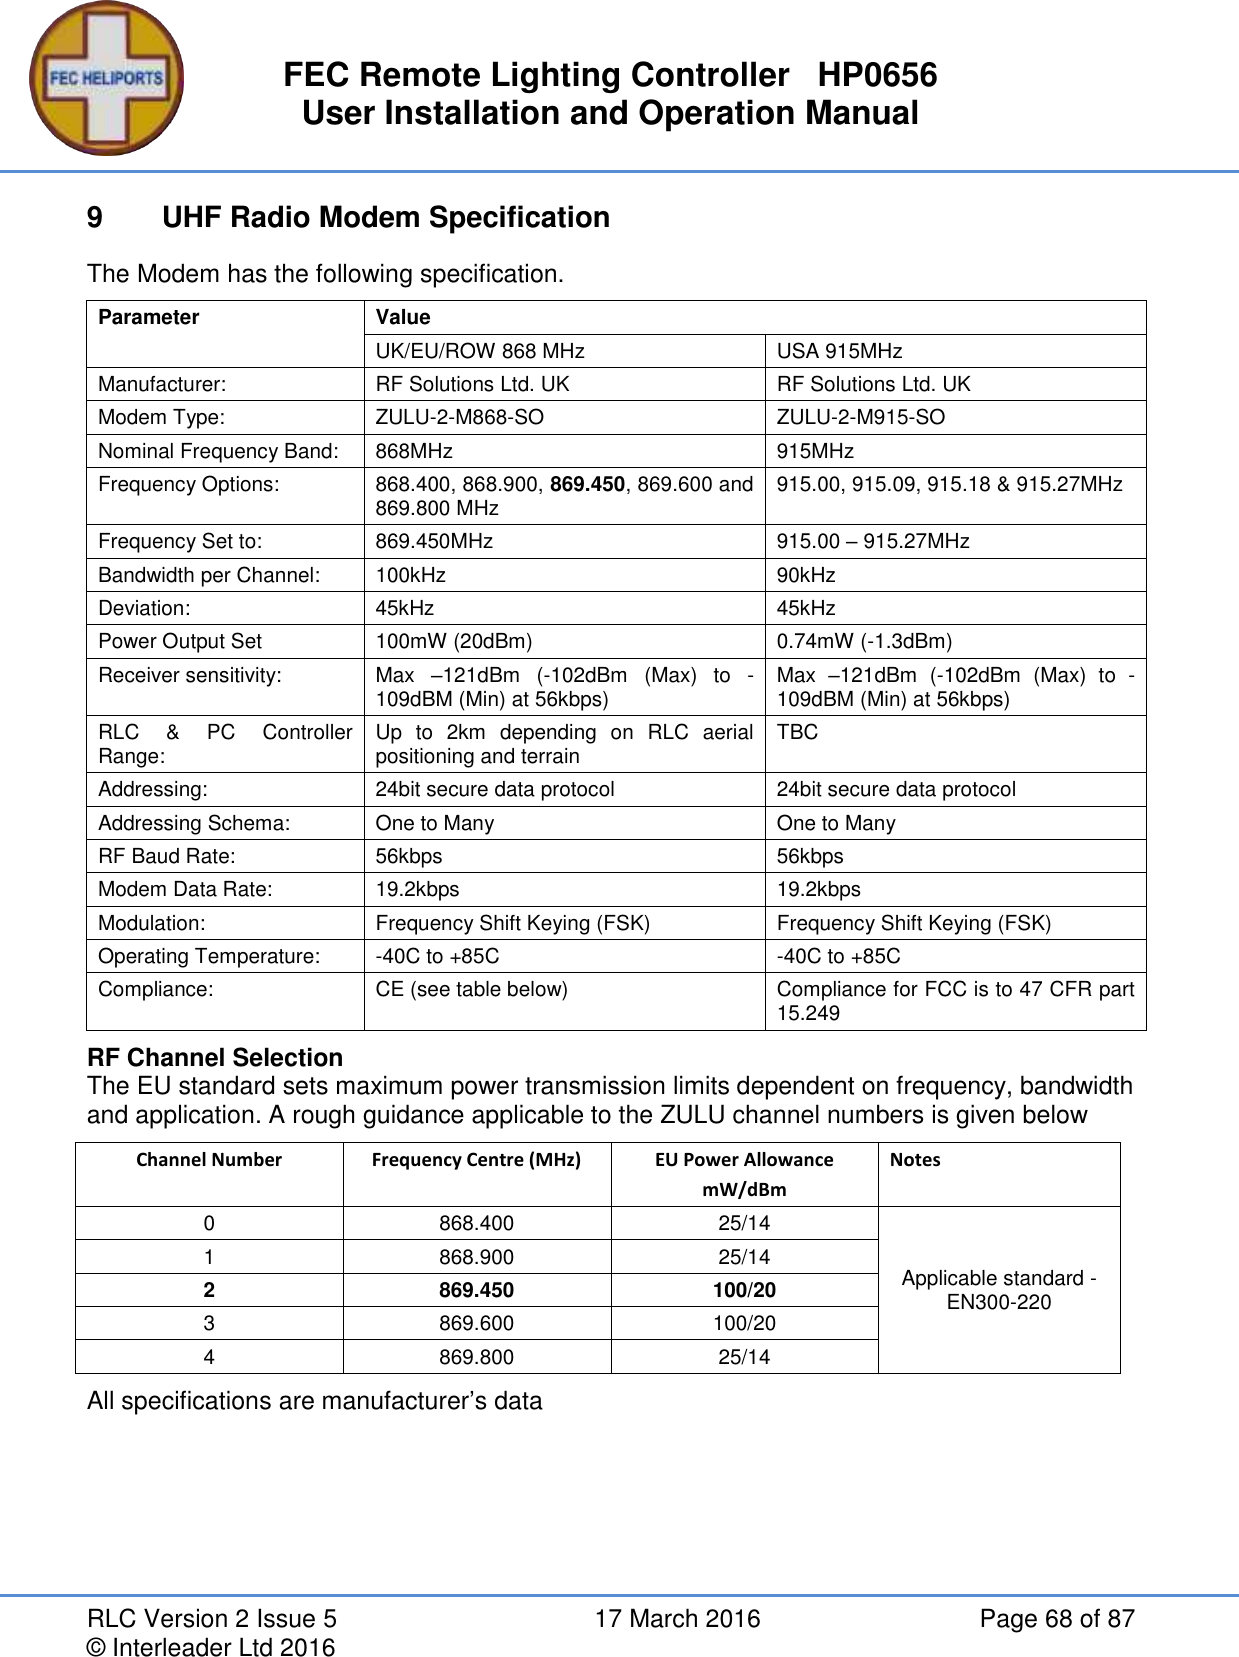 FEC Remote Lighting Controller   HP0656 User Installation and Operation Manual RLC Version 2 Issue 5  17 March 2016  Page 68 of 87 © Interleader Ltd 2016 9  UHF Radio Modem Specification The Modem has the following specification. Parameter Value UK/EU/ROW 868 MHz USA 915MHz Manufacturer: RF Solutions Ltd. UK RF Solutions Ltd. UK Modem Type: ZULU-2-M868-SO  ZULU-2-M915-SO  Nominal Frequency Band: 868MHz 915MHz Frequency Options: 868.400, 868.900, 869.450, 869.600 and 869.800 MHz 915.00, 915.09, 915.18 &amp; 915.27MHz Frequency Set to: 869.450MHz 915.00 – 915.27MHz Bandwidth per Channel: 100kHz 90kHz Deviation: 45kHz 45kHz Power Output Set 100mW (20dBm) 0.74mW (-1.3dBm) Receiver sensitivity: Max  –121dBm  (-102dBm  (Max)  to  -109dBM (Min) at 56kbps) Max  –121dBm  (-102dBm  (Max)  to  -109dBM (Min) at 56kbps) RLC  &amp;  PC  Controller Range: Up  to  2km  depending  on  RLC  aerial positioning and terrain  TBC Addressing: 24bit secure data protocol 24bit secure data protocol Addressing Schema: One to Many One to Many RF Baud Rate:  56kbps 56kbps Modem Data Rate: 19.2kbps 19.2kbps Modulation: Frequency Shift Keying (FSK) Frequency Shift Keying (FSK) Operating Temperature: -40C to +85C -40C to +85C Compliance: CE (see table below) Compliance for FCC is to 47 CFR part 15.249 RF Channel Selection The EU standard sets maximum power transmission limits dependent on frequency, bandwidth and application. A rough guidance applicable to the ZULU channel numbers is given below  Channel Number Frequency Centre (MHz) EU Power Allowance mW/dBm Notes 0 868.400 25/14 Applicable standard - EN300-220 1 868.900 25/14 2 869.450 100/20 3 869.600 100/20 4 869.800 25/14 All specifications are manufacturer’s data   